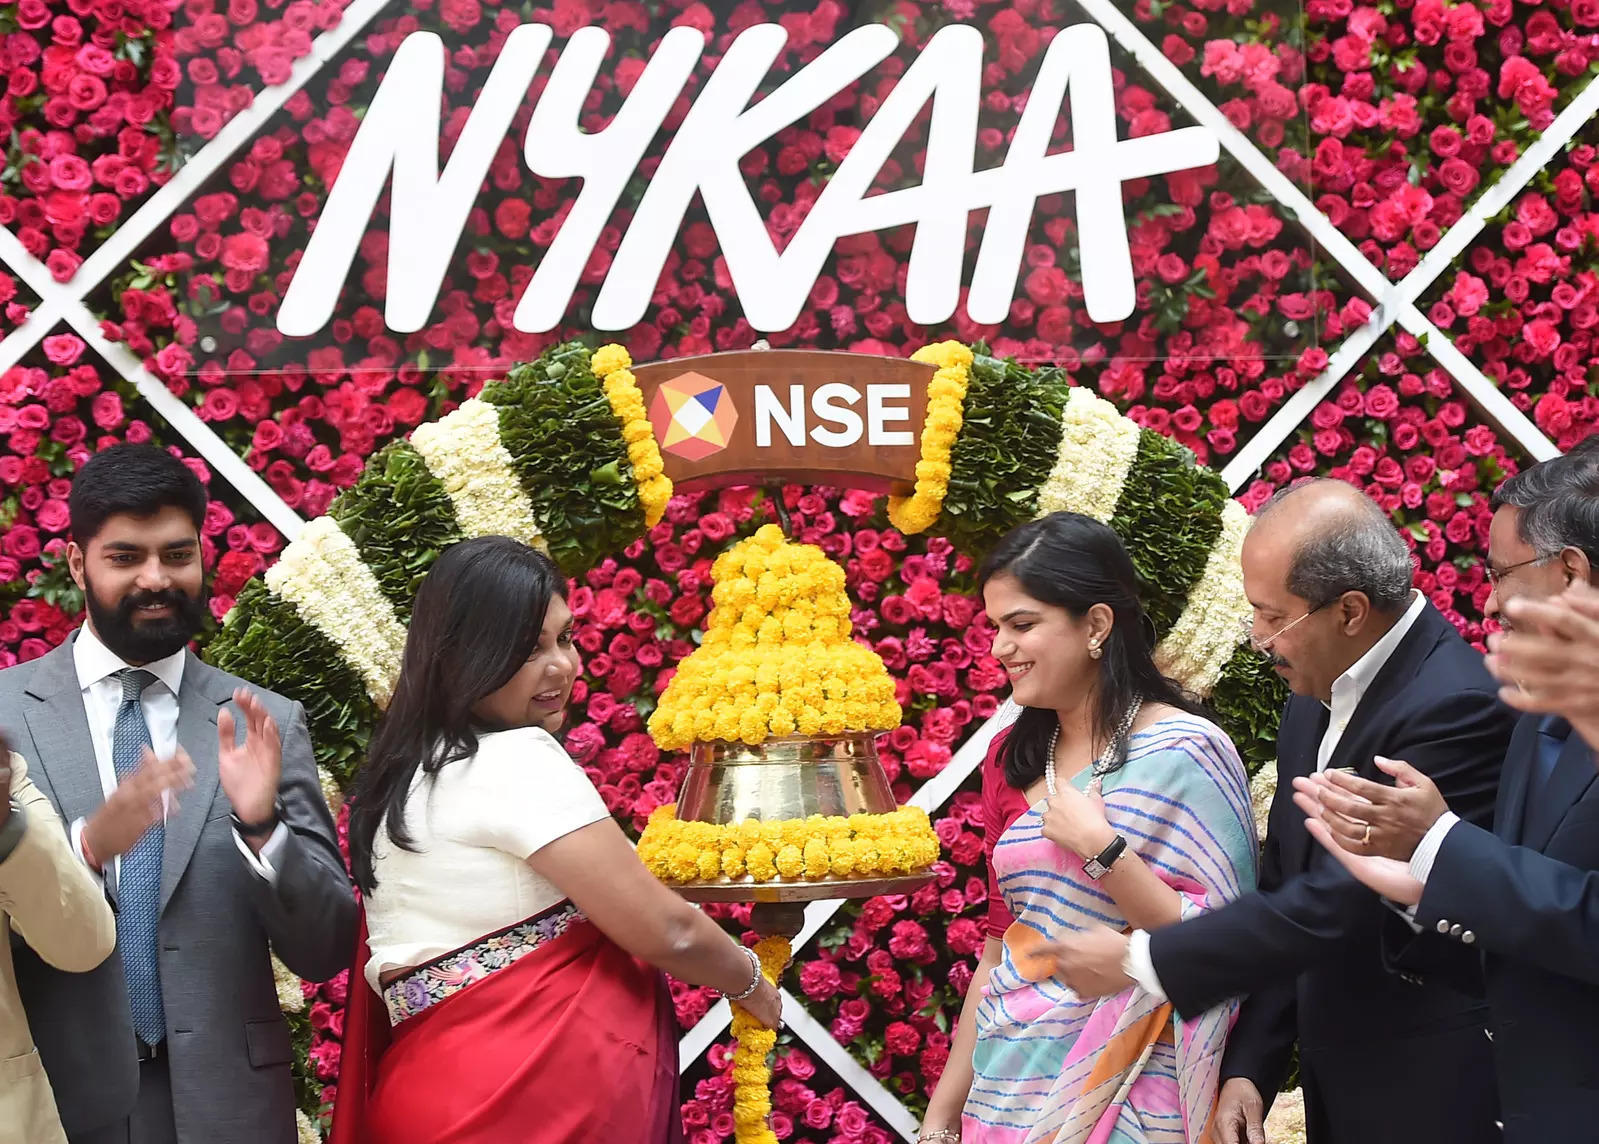 VCs without women in key position find difficult to understand women centric biz: Nykaa's Adwaita Nayar